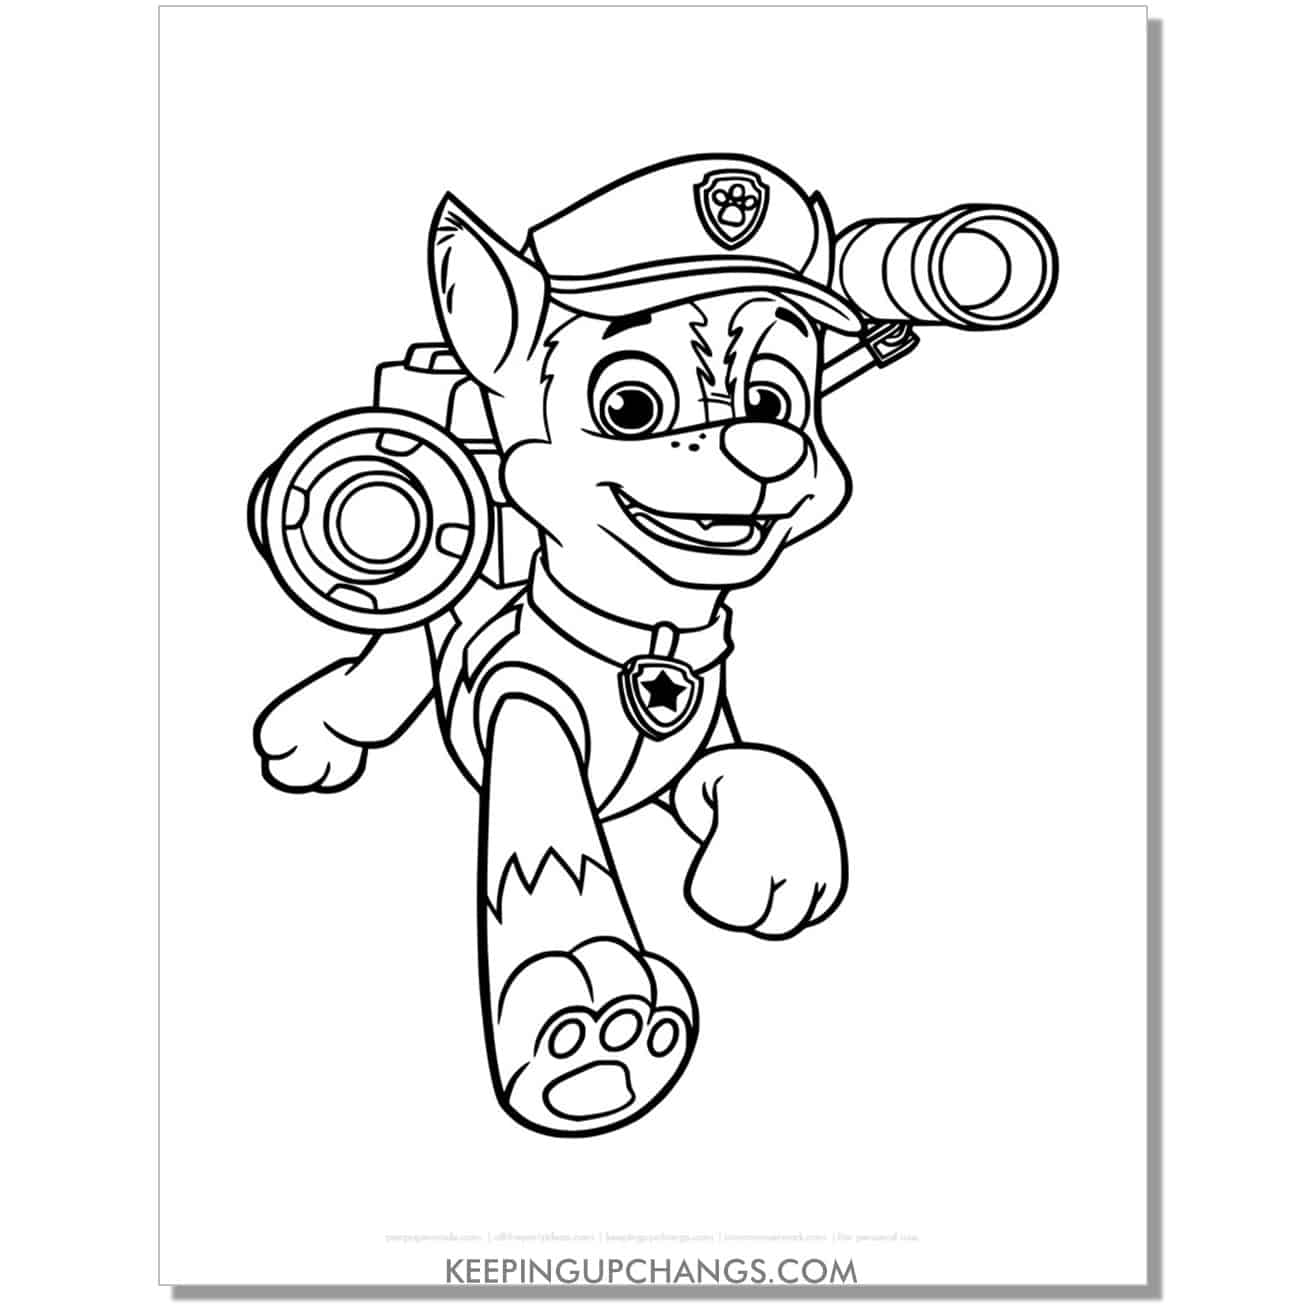 free chase with action gear ready paw patrol coloring page, sheet.